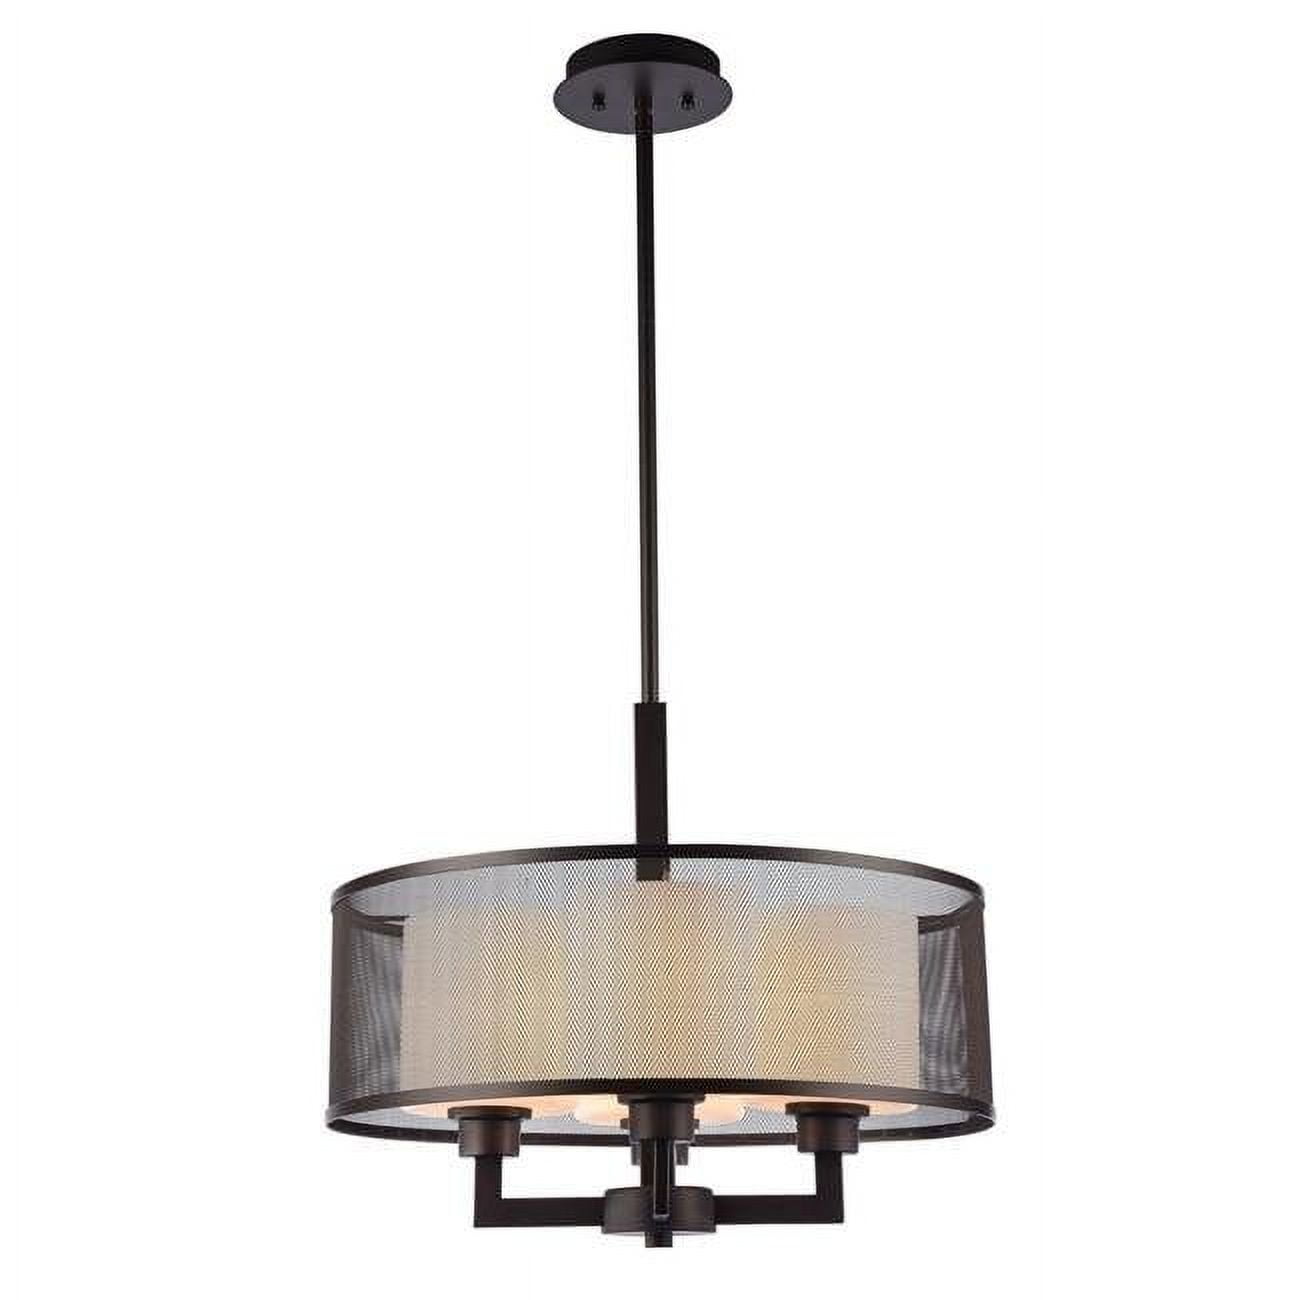 Ch29034rb19-up4 19 In. Lighting Audrey Transitional 4 Light Rubbed Bronze Ceiling Pendant - Chrome